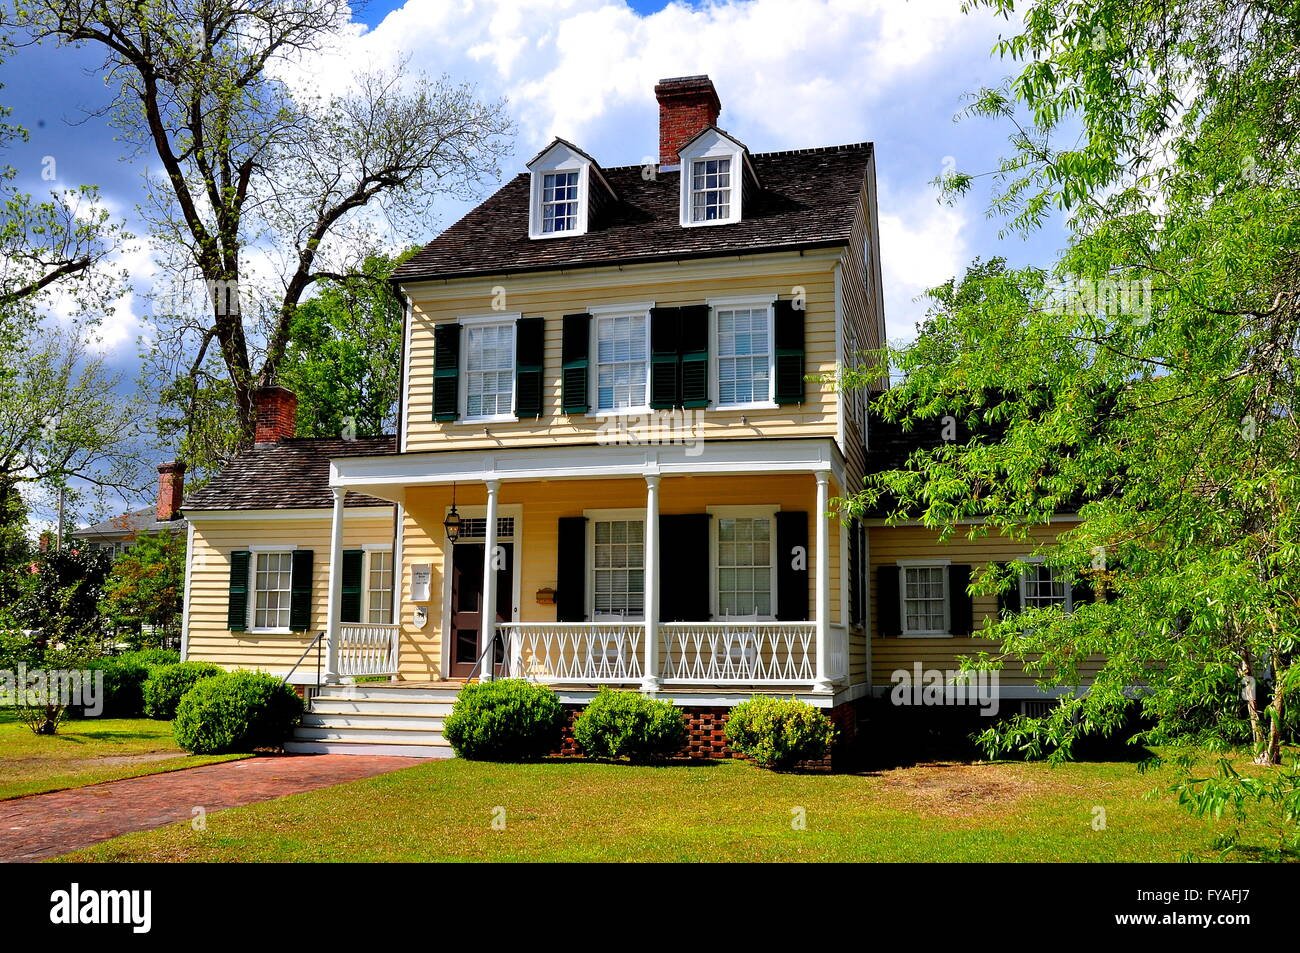 New Bern, North Carolina:  Federal style 1795 Cutting-Allen House in the historic district * Stock Photo